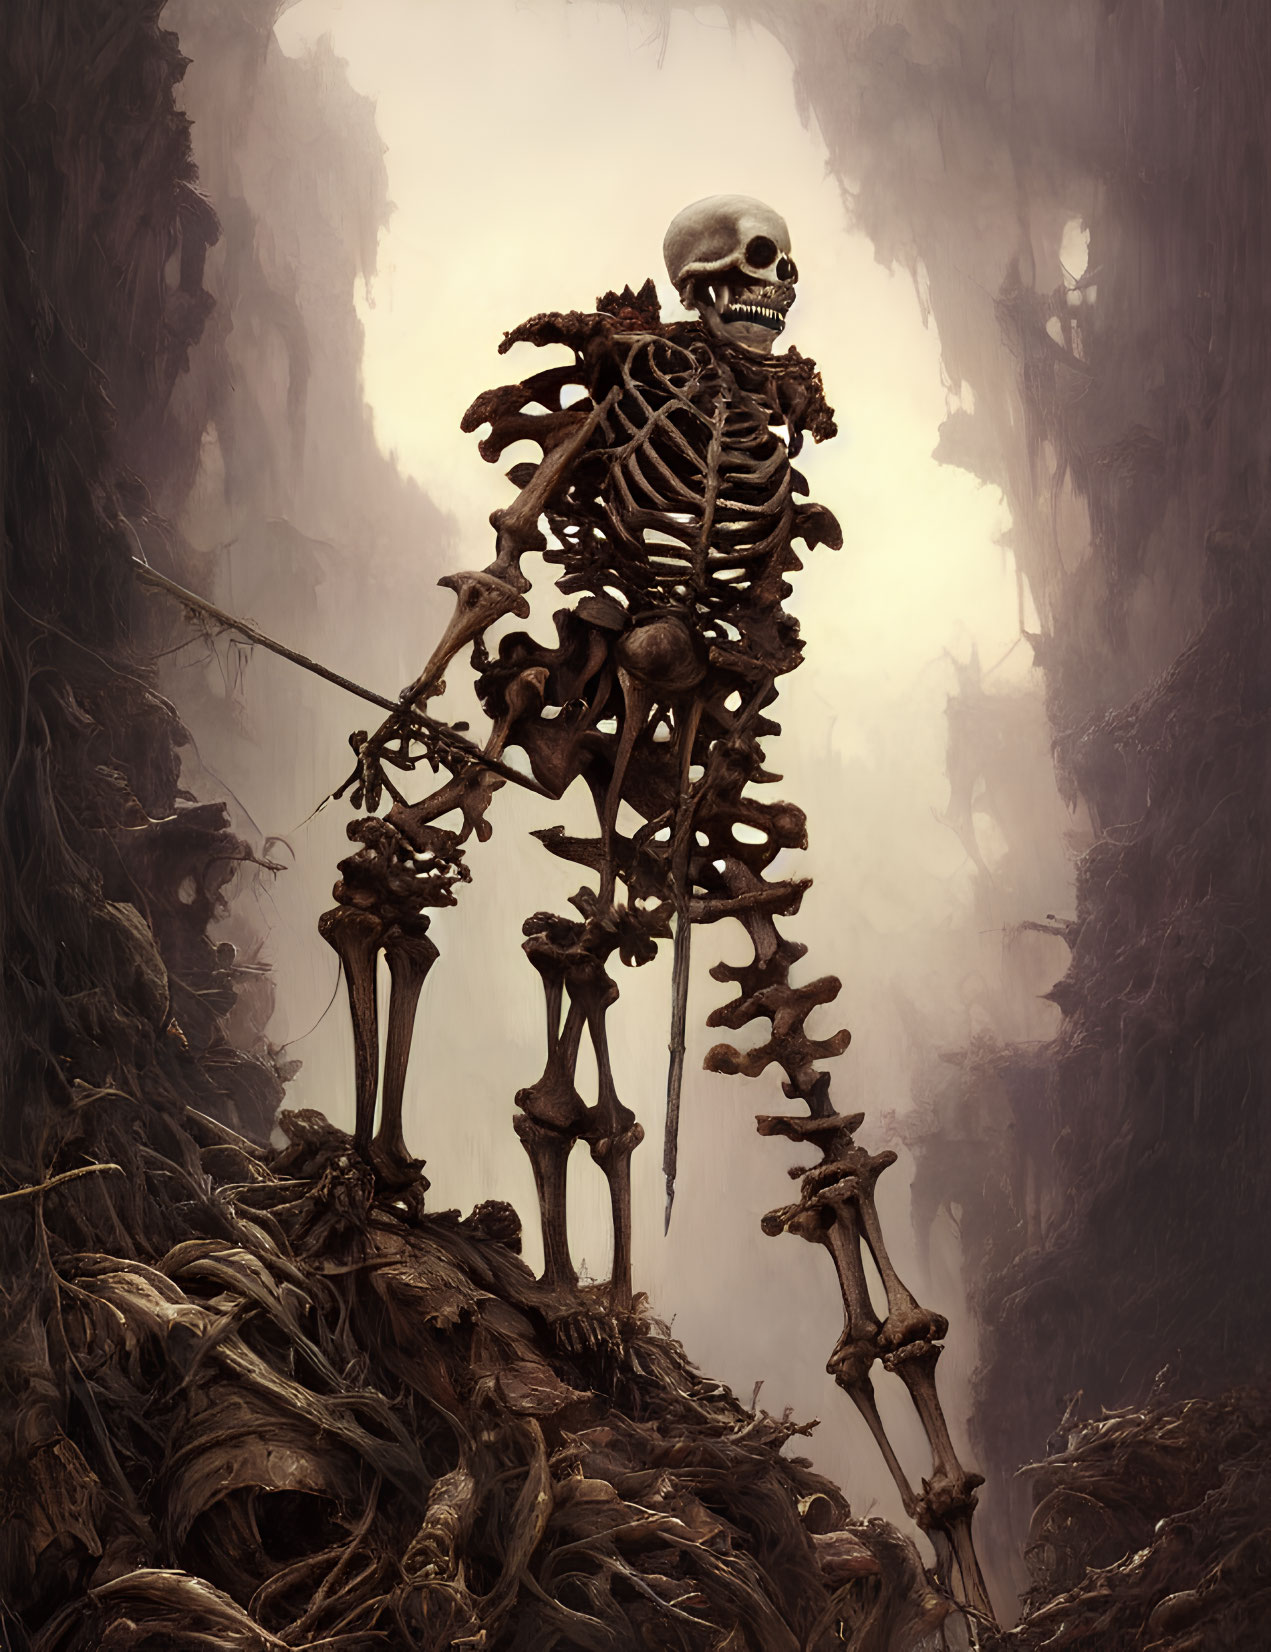 Skeleton with Spear on Bone Pile in Misty Chasm